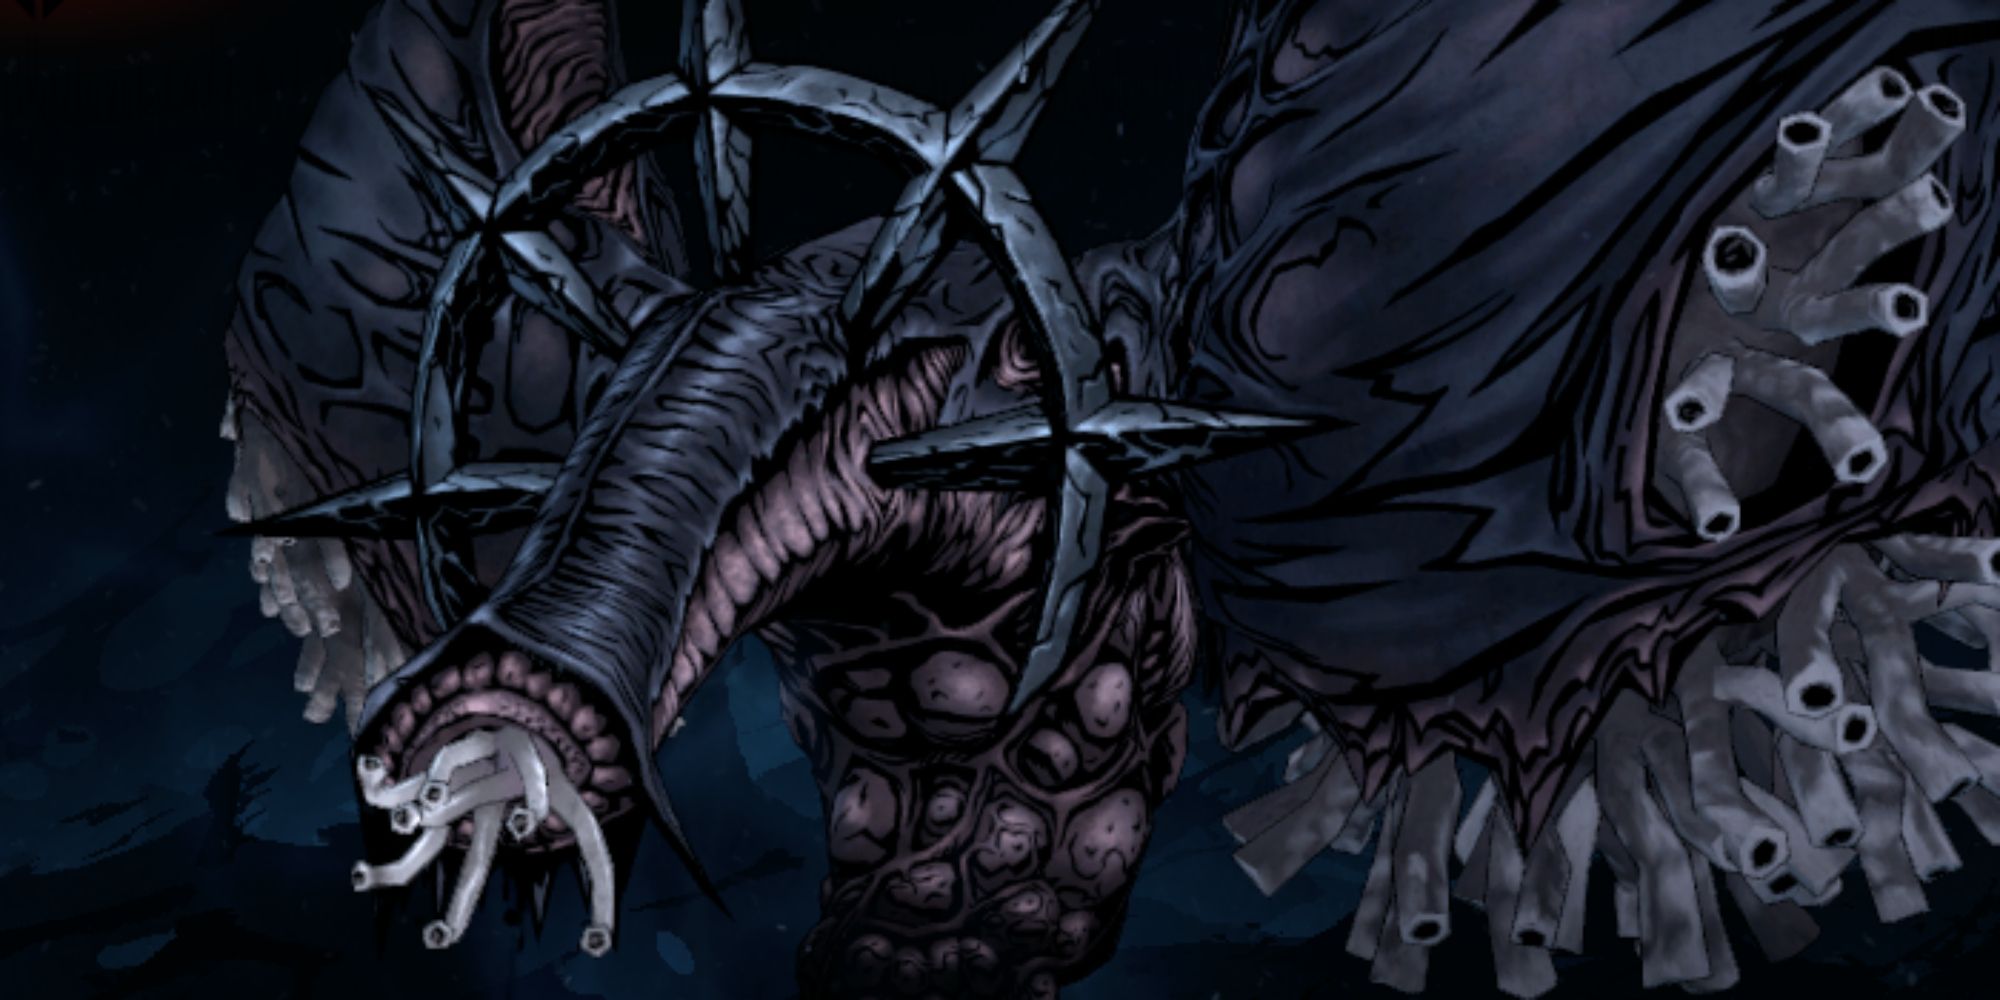 The Resentment boss, Seething Sigh, in Darkest Dungeon 2